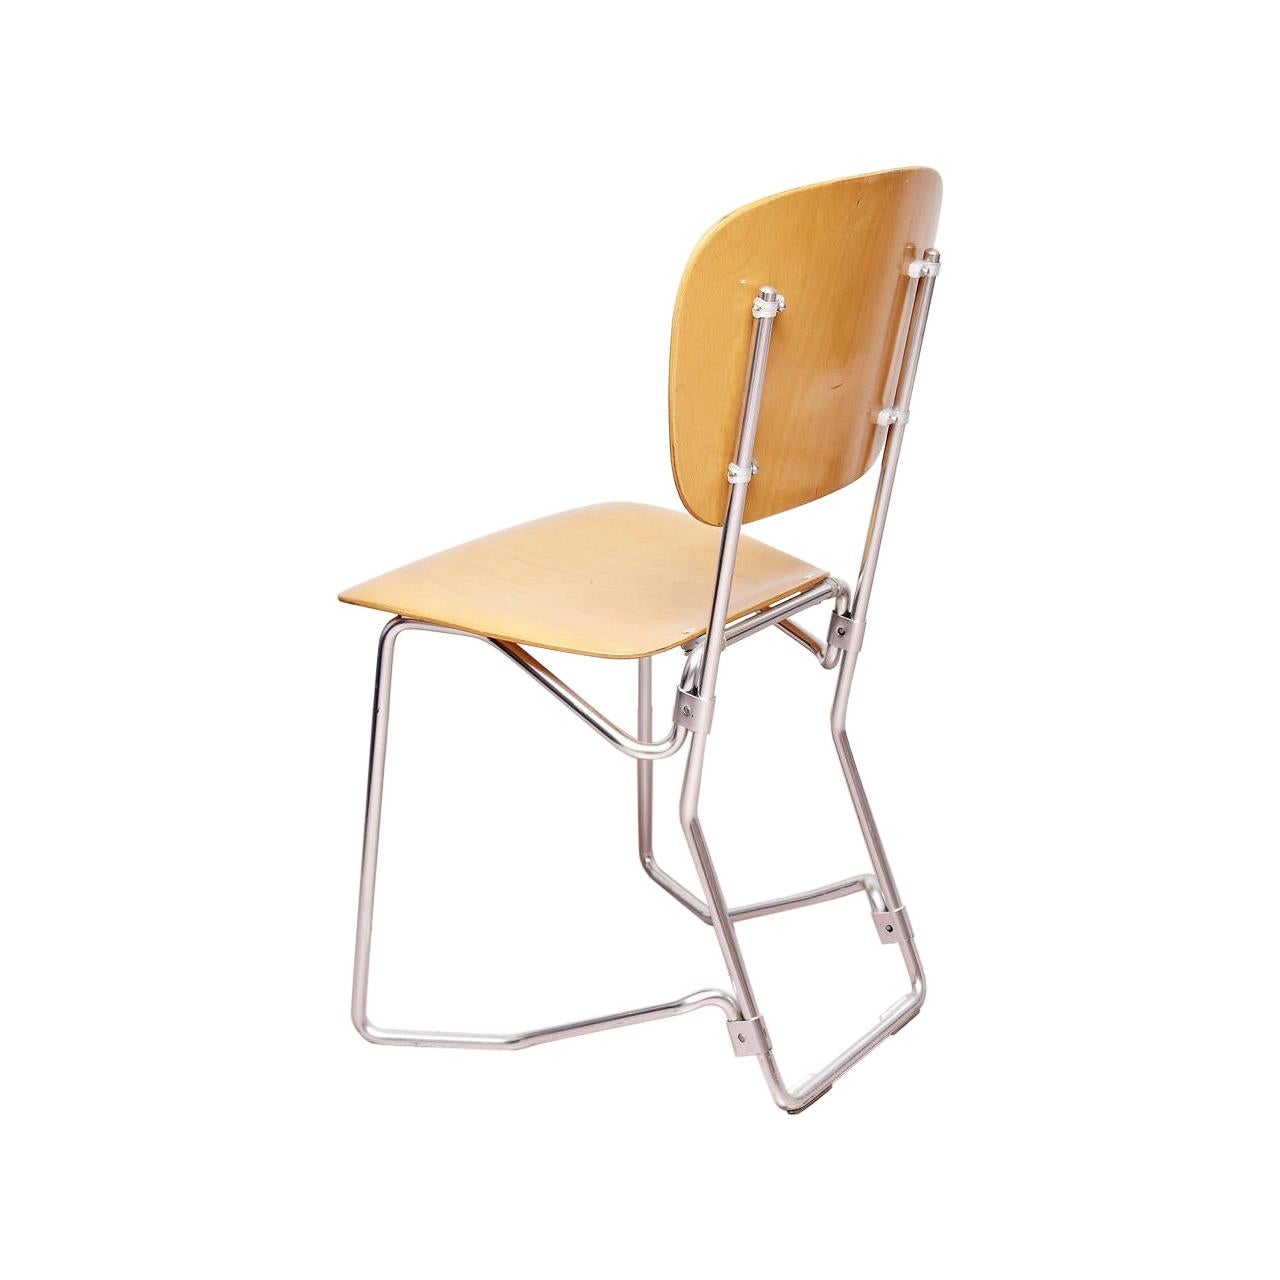 Armin Wirth Mid-Century Modern Metal and Wood Swiss Stackable Chairs for Aluflex